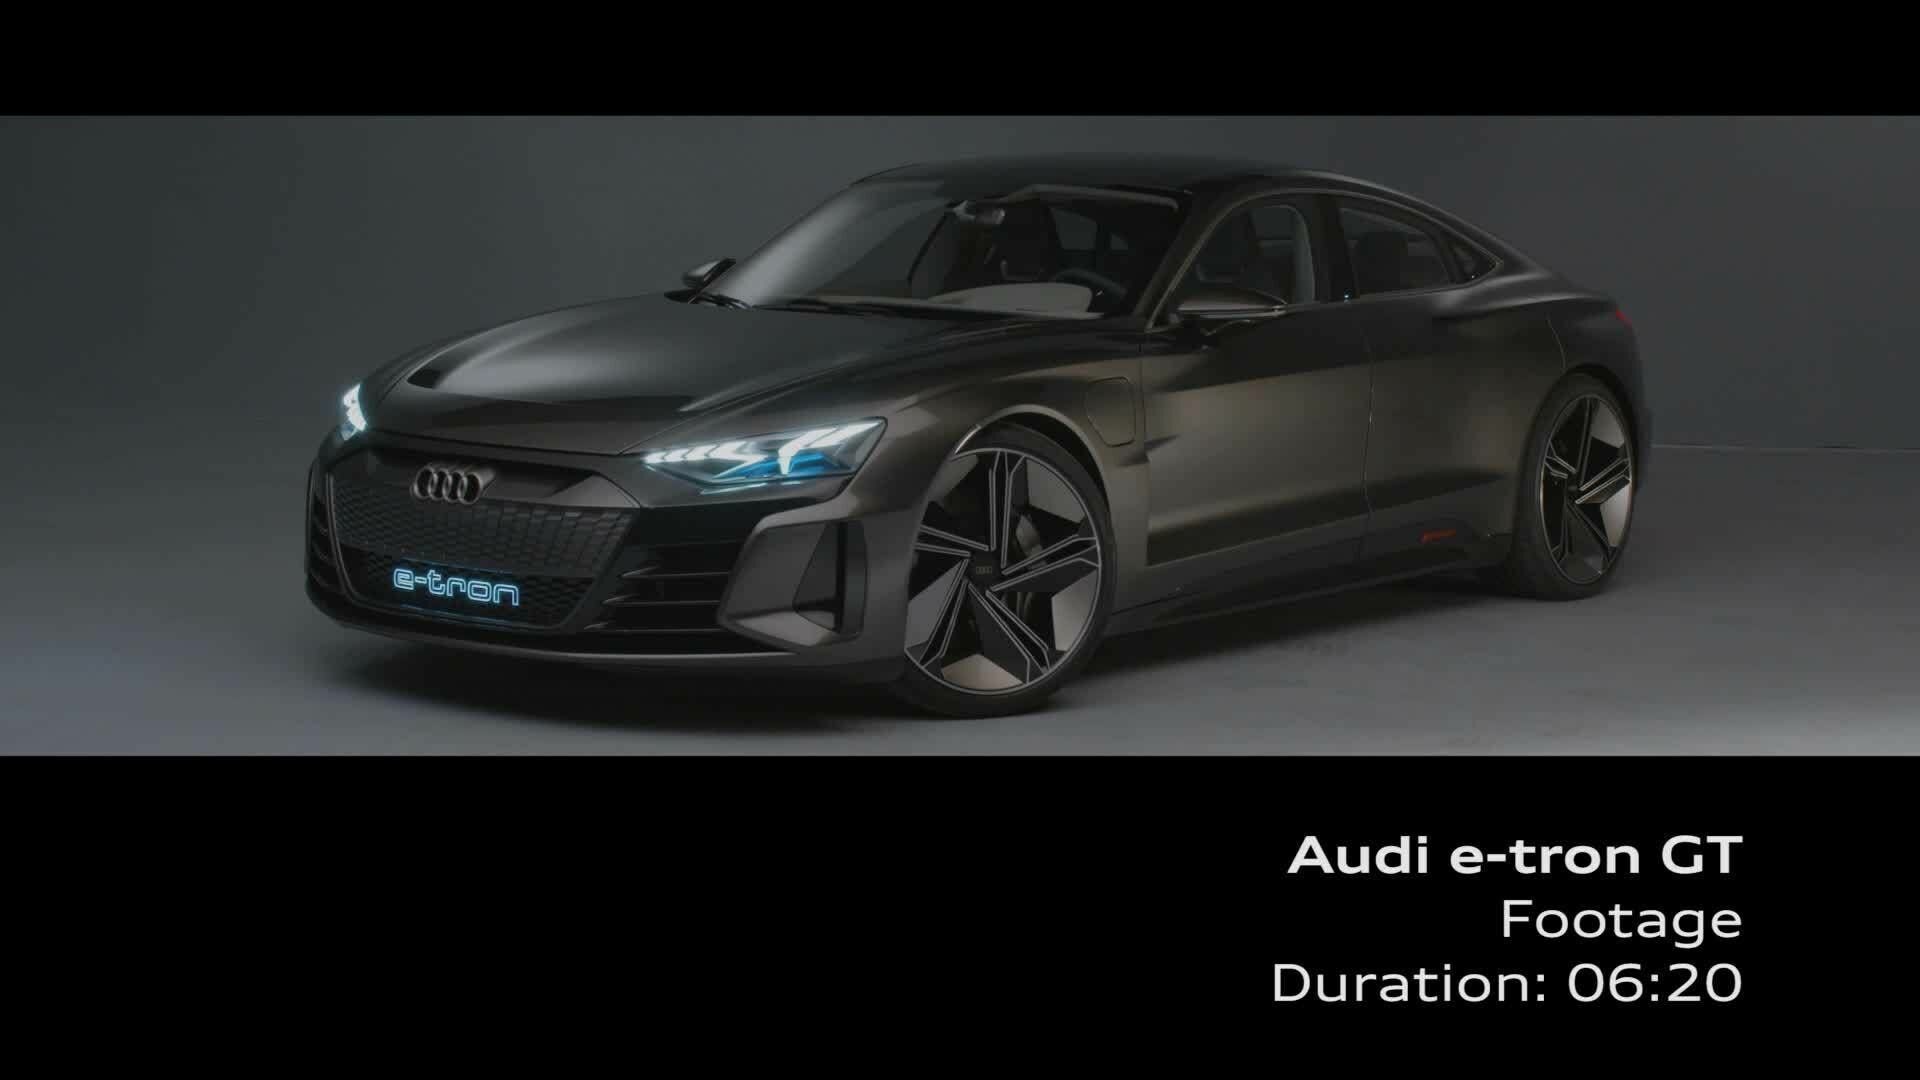 Audi's Elegant E-Tron GT Transforms From Movie Star To Real Car